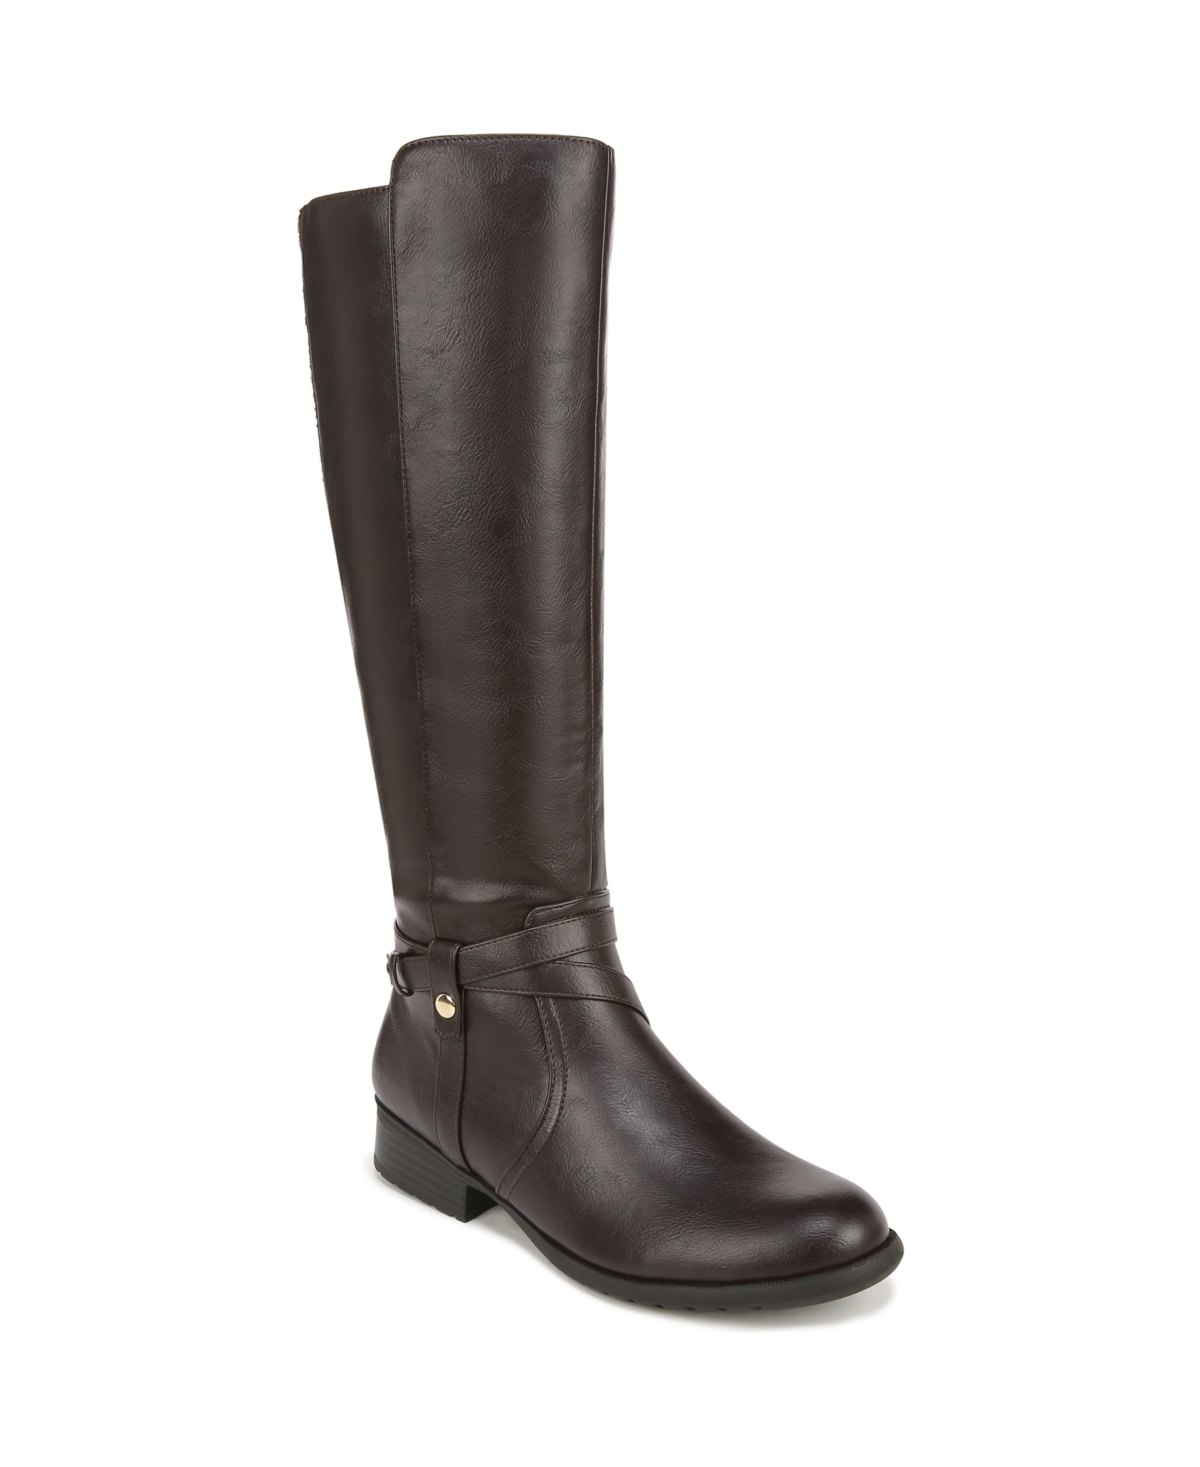 X-trovert Riding Boots - Mushroom Faux Leather